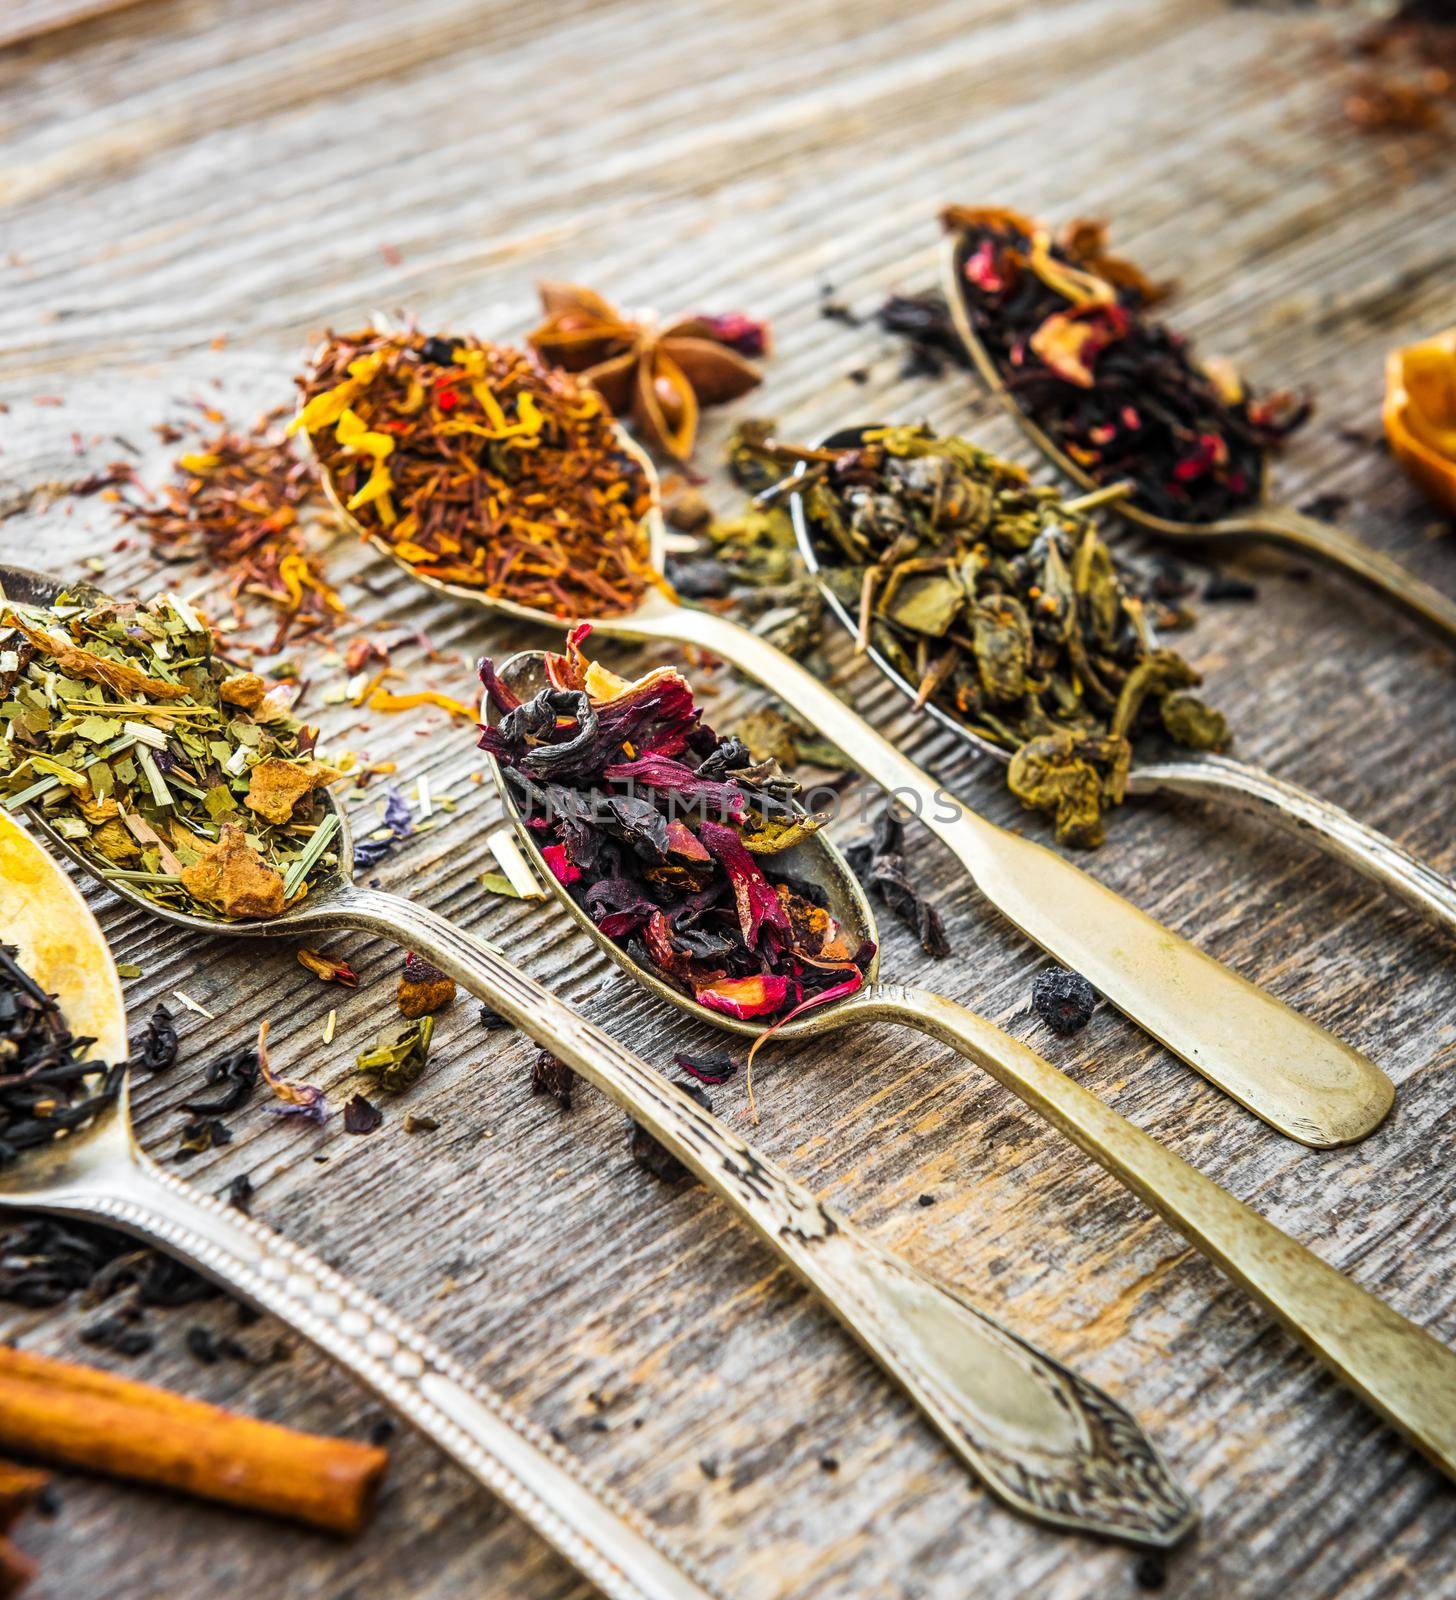 assortment of dry teas in silver spoons on wooden background